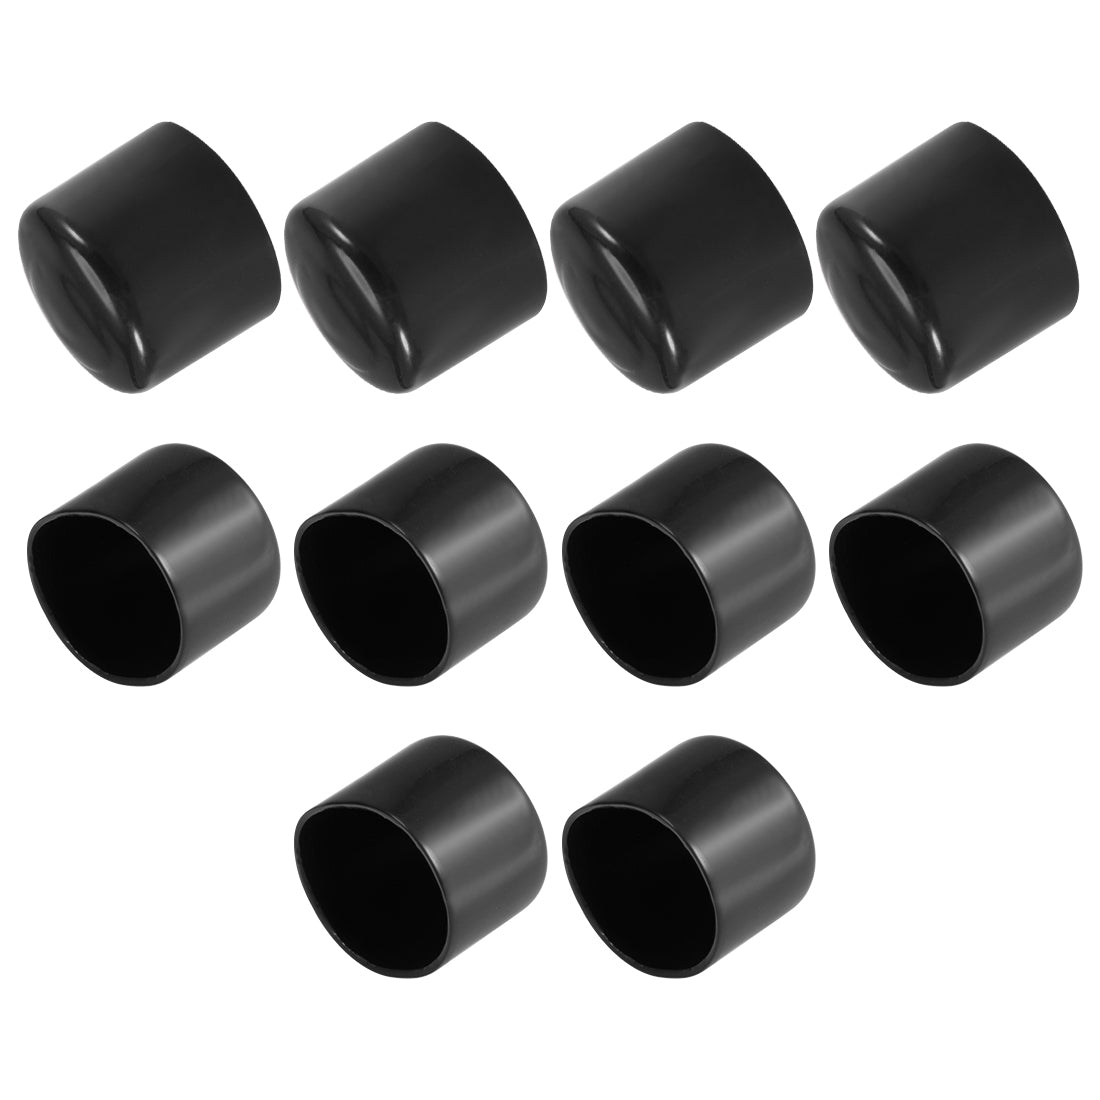 uxcell Uxcell 10pcs Rubber End Caps 60mm ID 39mm Height Screw Thread Protectors Black